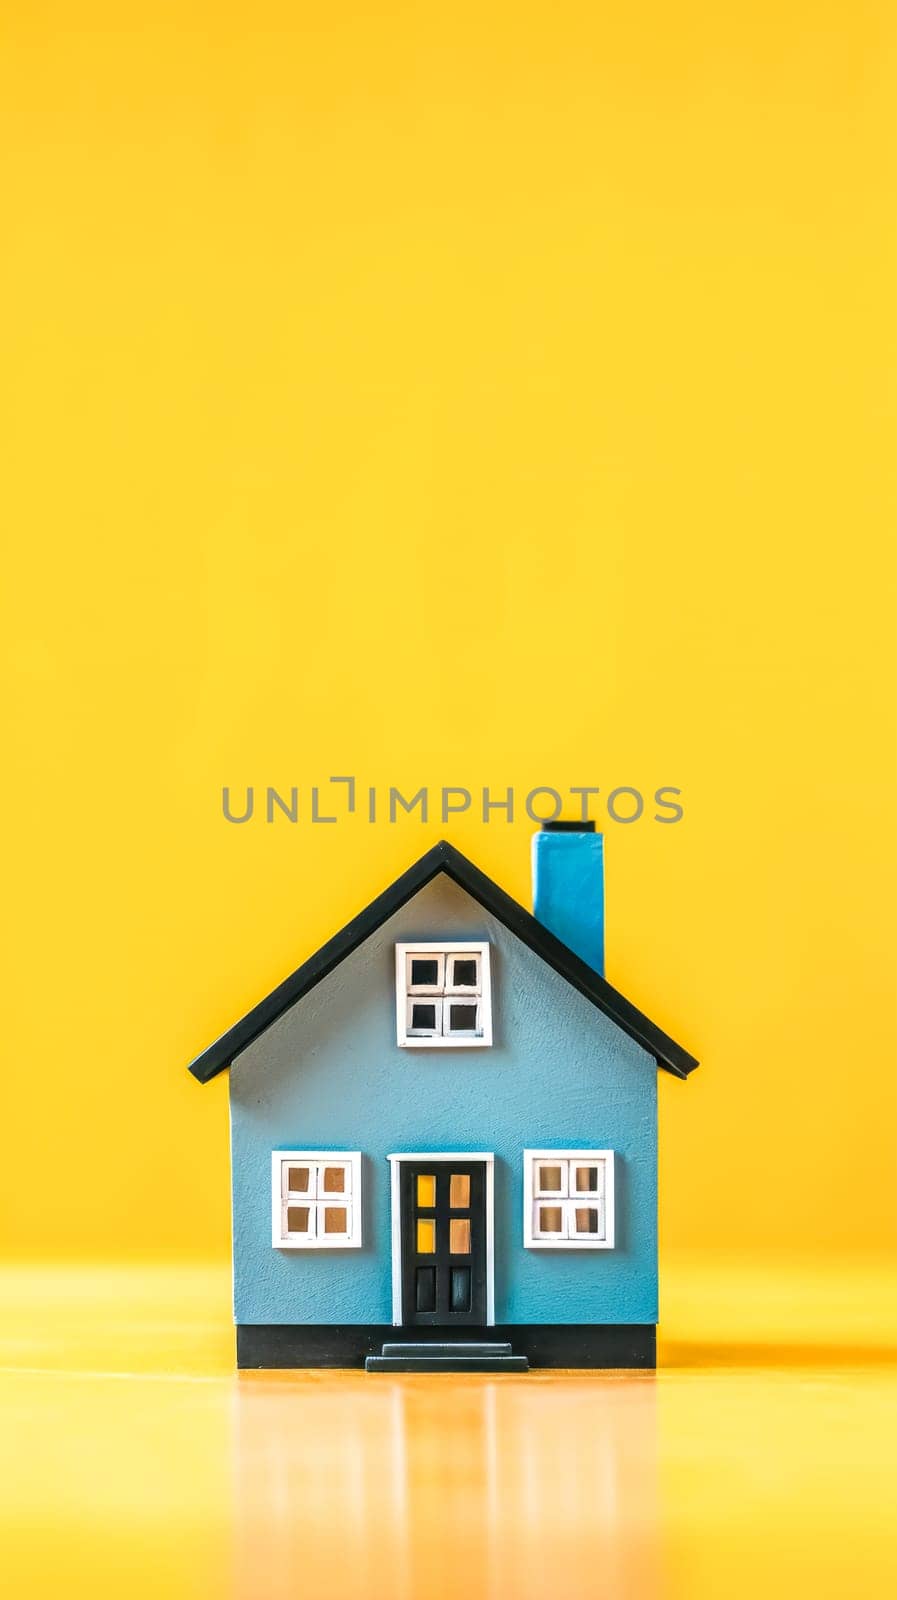 miniature house with a blue facade and a bright blue chimney, set against a vibrant yellow background, evoking themes of home, comfort, and the simplicity of domestic life, vertical